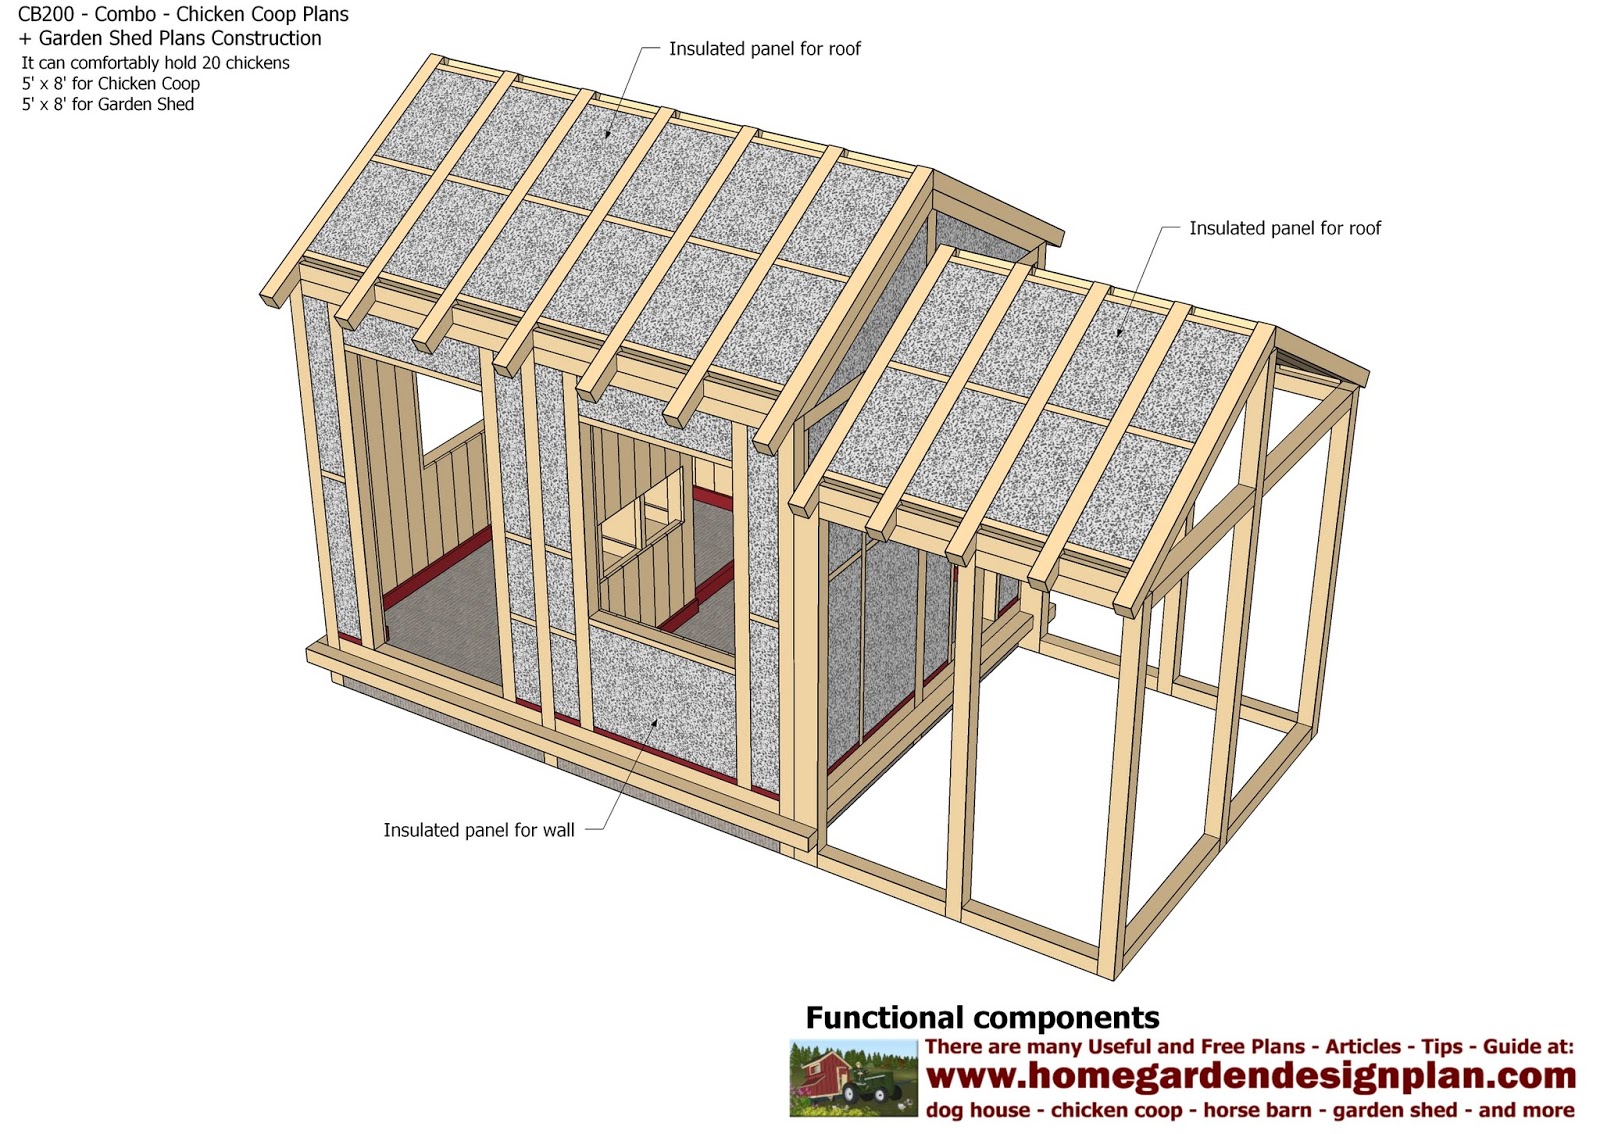 Shed Plans Building: CB200 Combo Plans Chicken Coop Plans ...